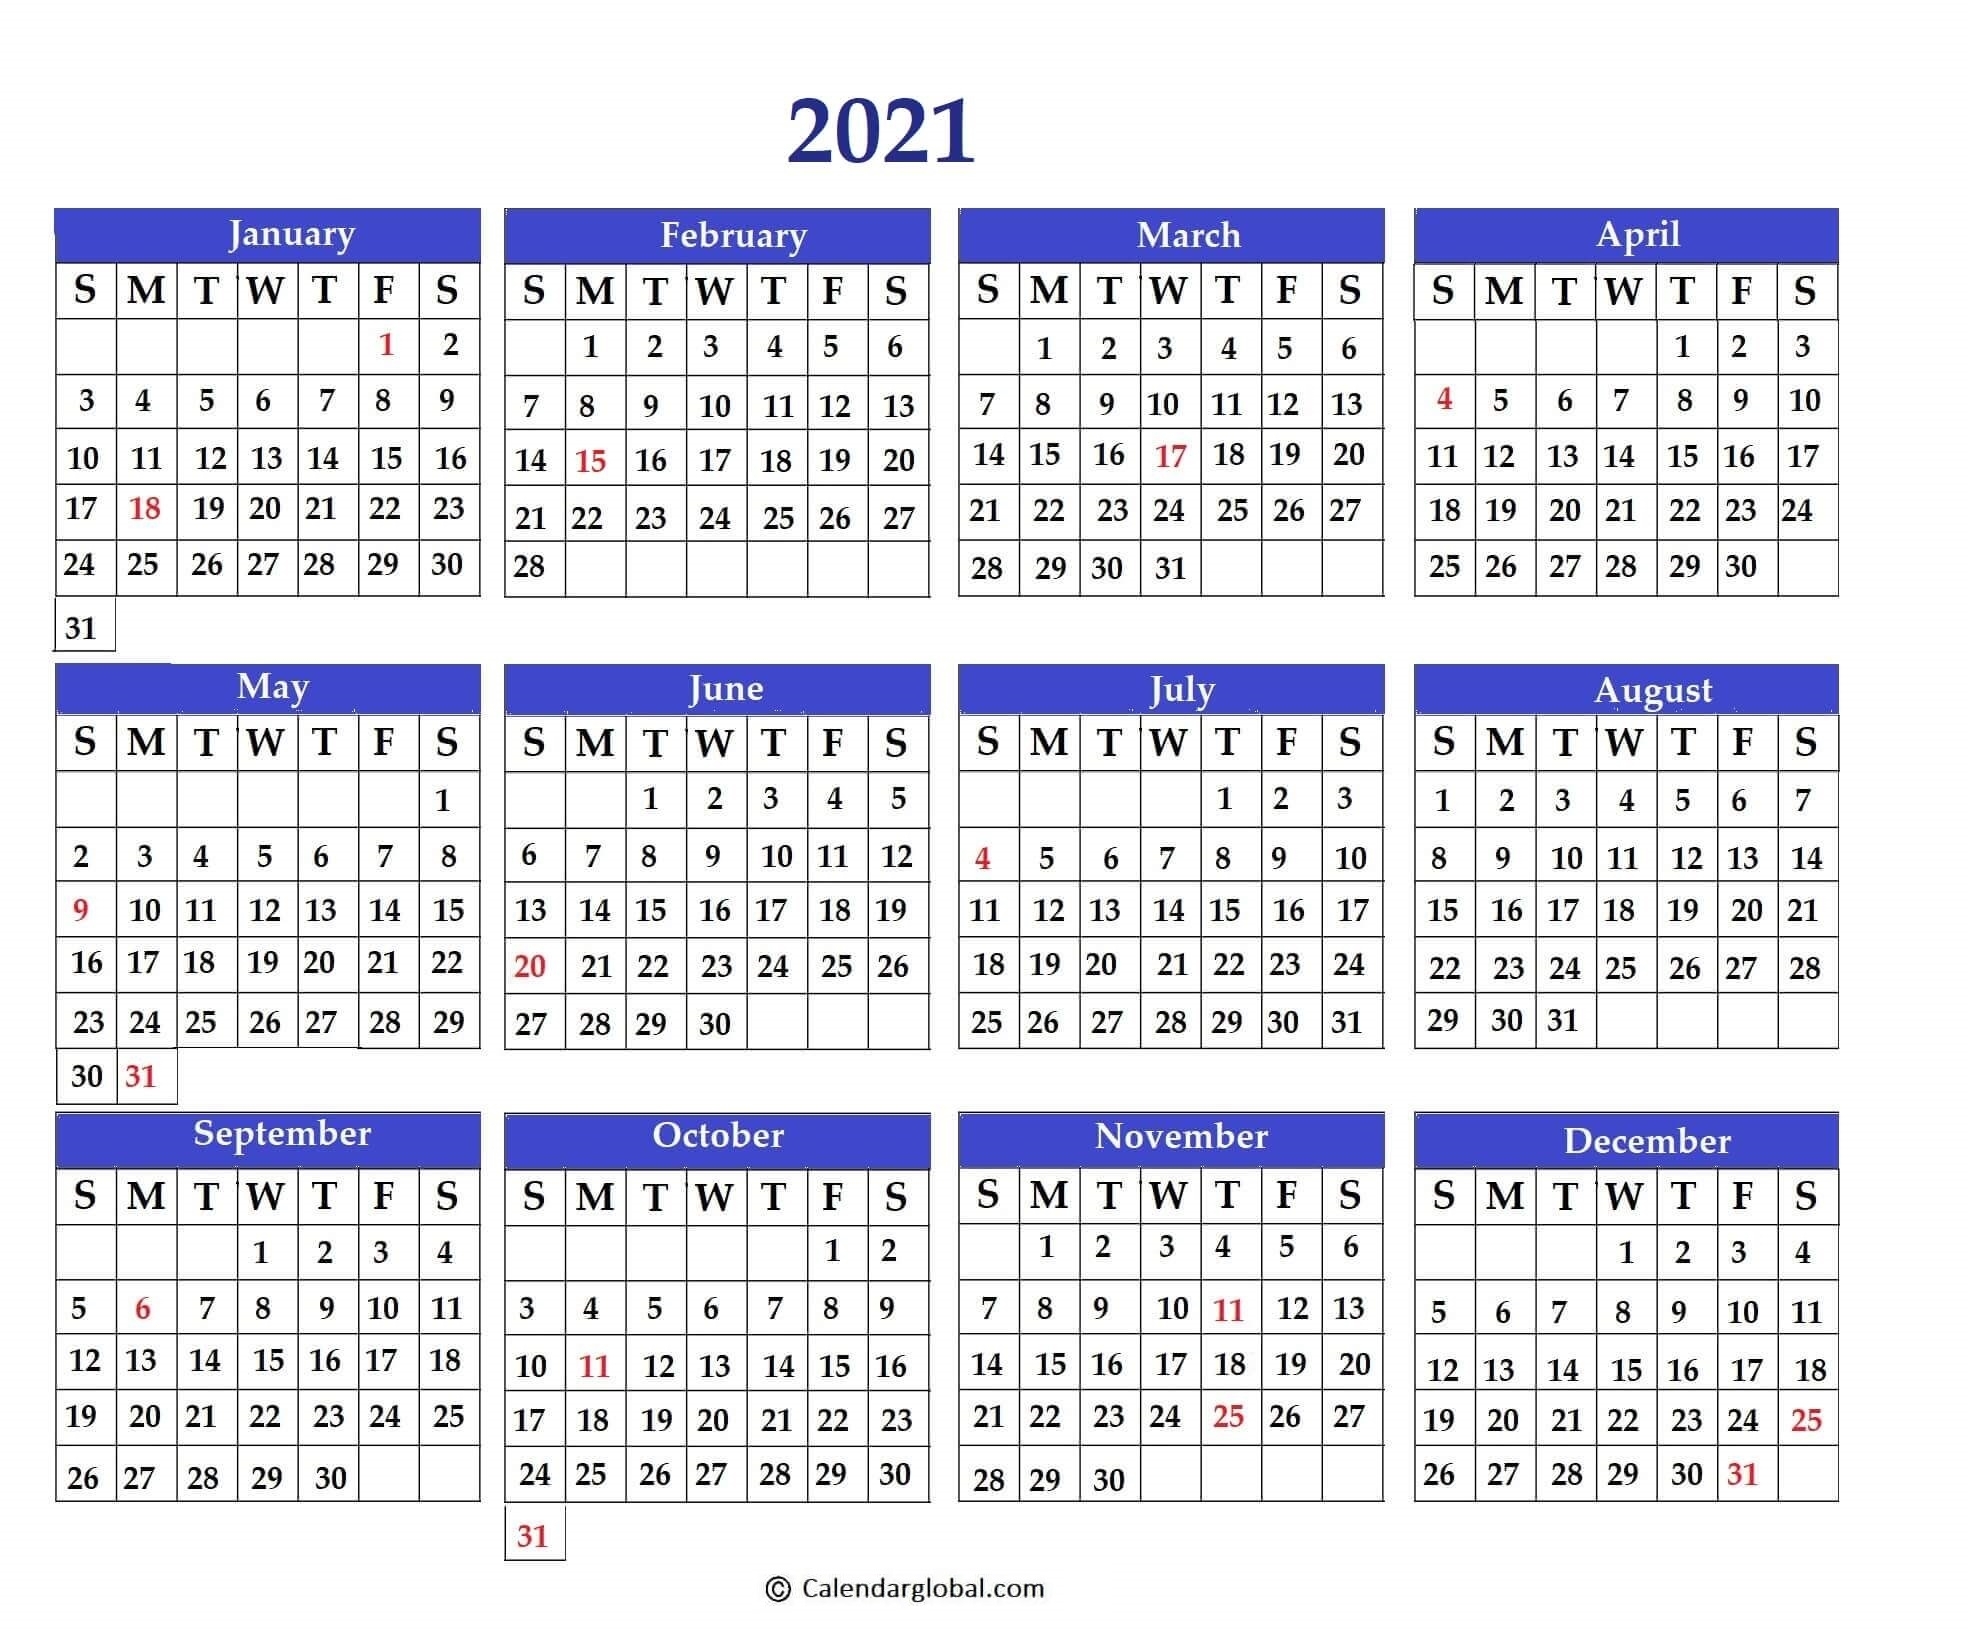 2021 Calendar: Free Printable Yearly One Page - Calendarglobal